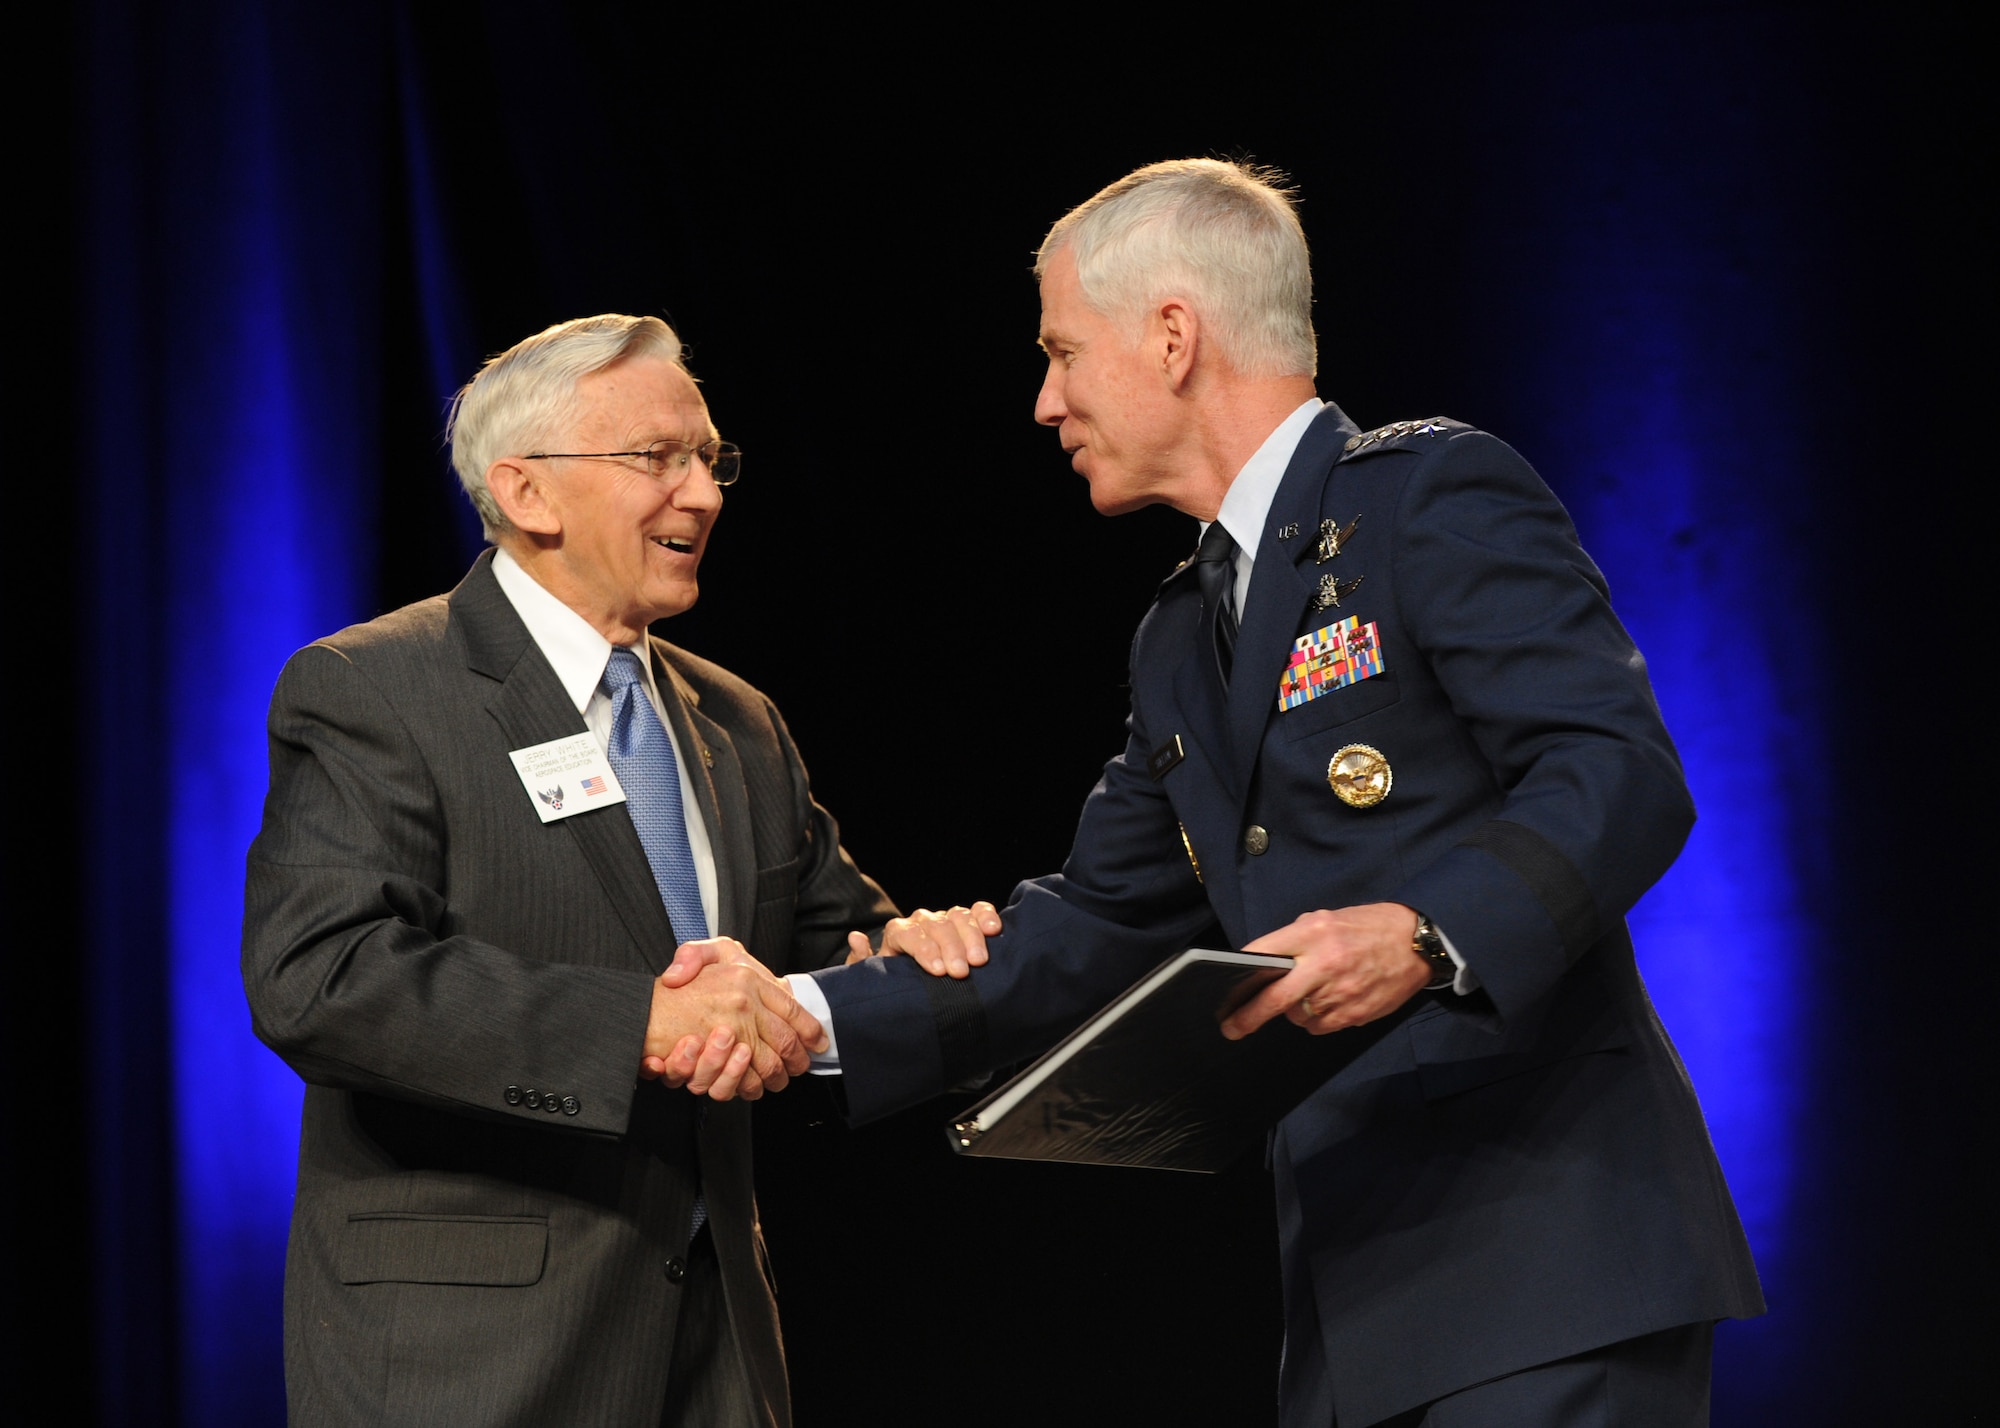 Jerry White presents Gen. William L. Shelton a book on behalf of the Air Force Association Sept. 17, 2013, at the Air Force Association’s 2013 Air & Space Conference and Technology Exposition in Washington, D.C. The conference is a professional development event sponsored and conducted by AFA in support of the total Air Force. White is the vice chairman of the board and Shelton is the commander of Air Force Space Command. (U.S. Air Force photo/Airman 1st Class Aaron Stout)